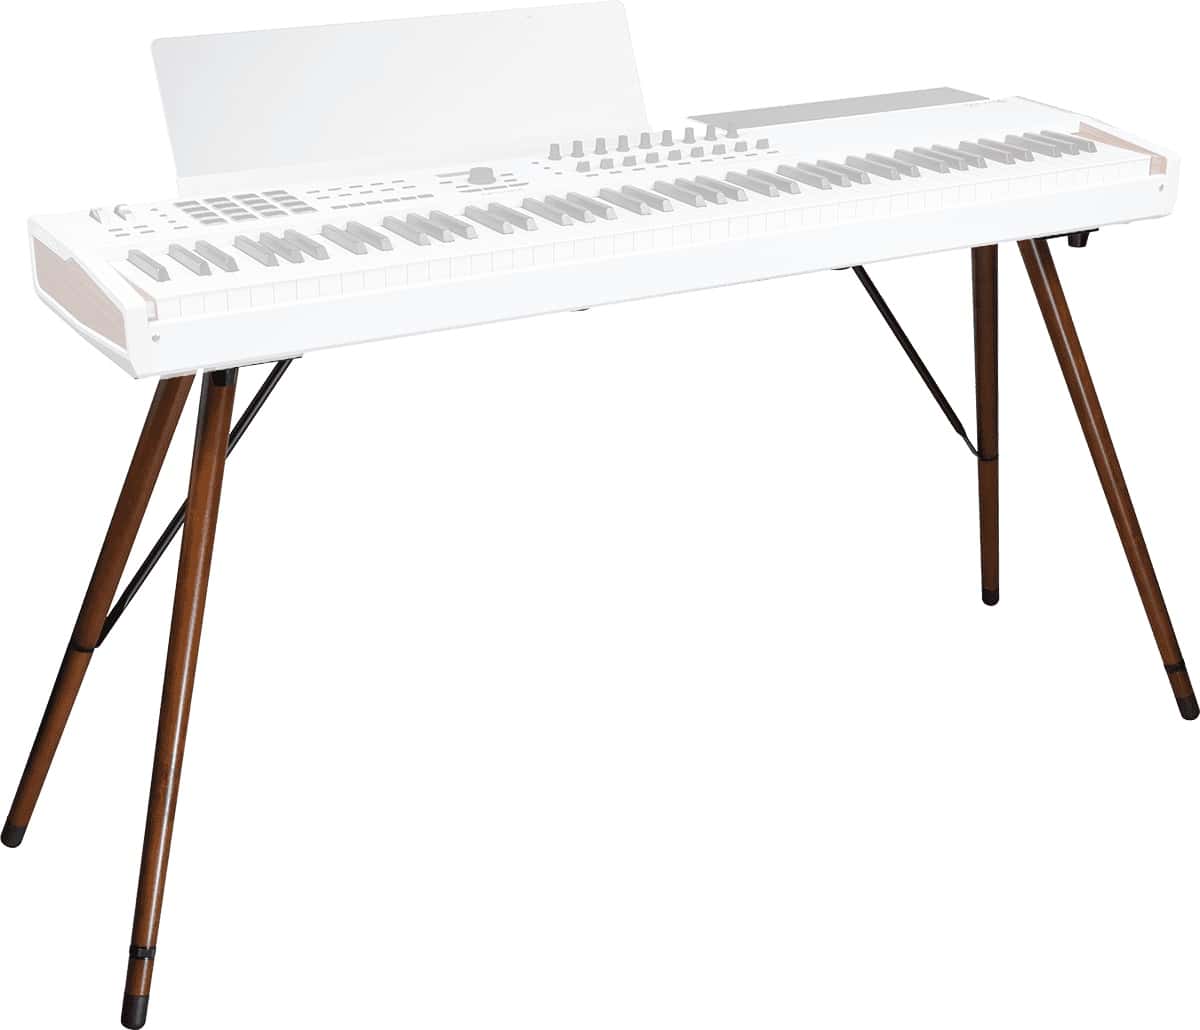 Professionnel Support Pour Clavier Piano Synthétiseur Stand Pied